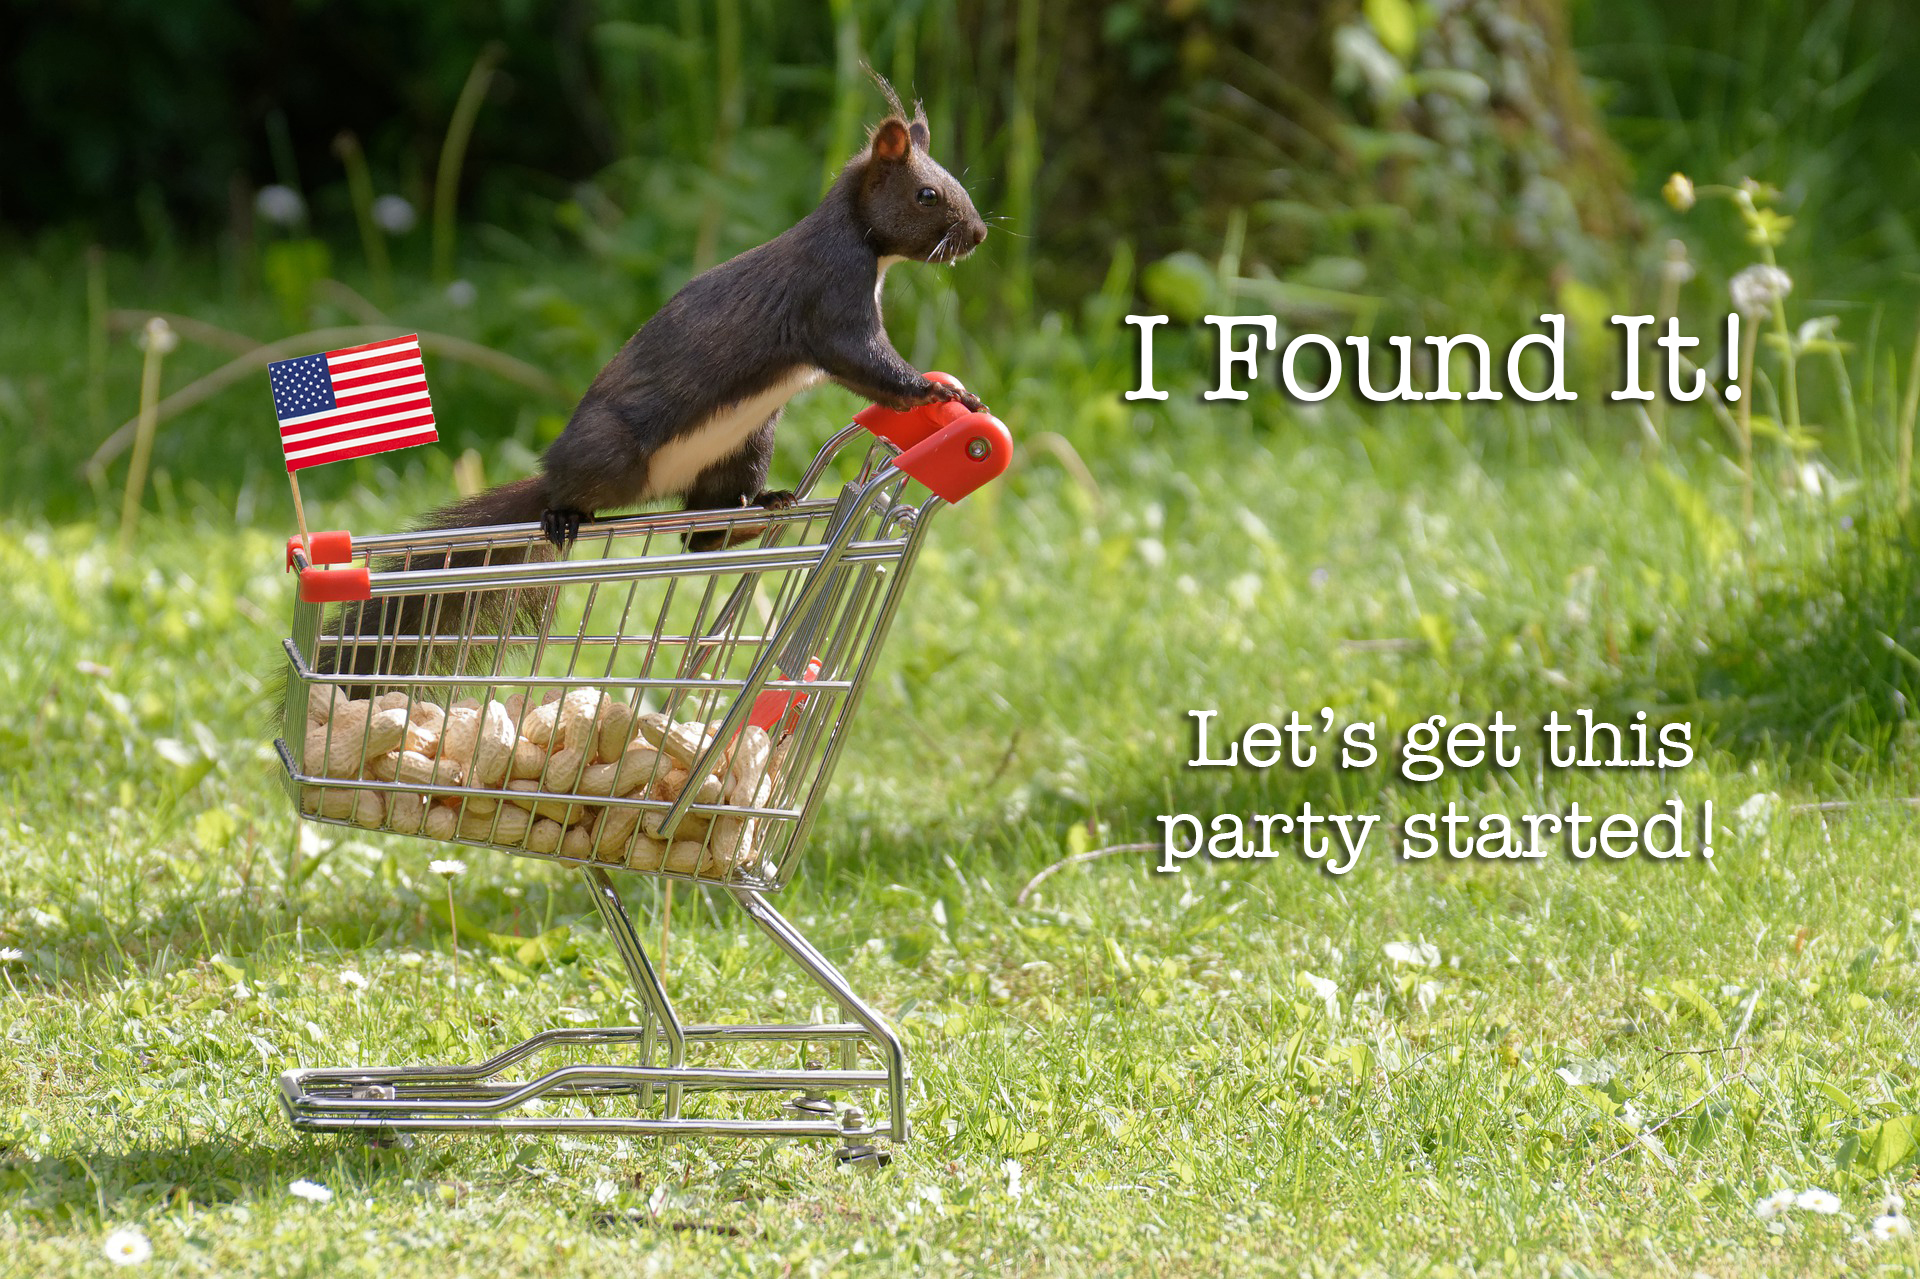  BIG SOLUTION: Well-Established Patriot Shop with Over 450 USA-Made Products with no Poisonous Chemicals, No Debt, and No Buyout – Ditch Big Box Stores Now!